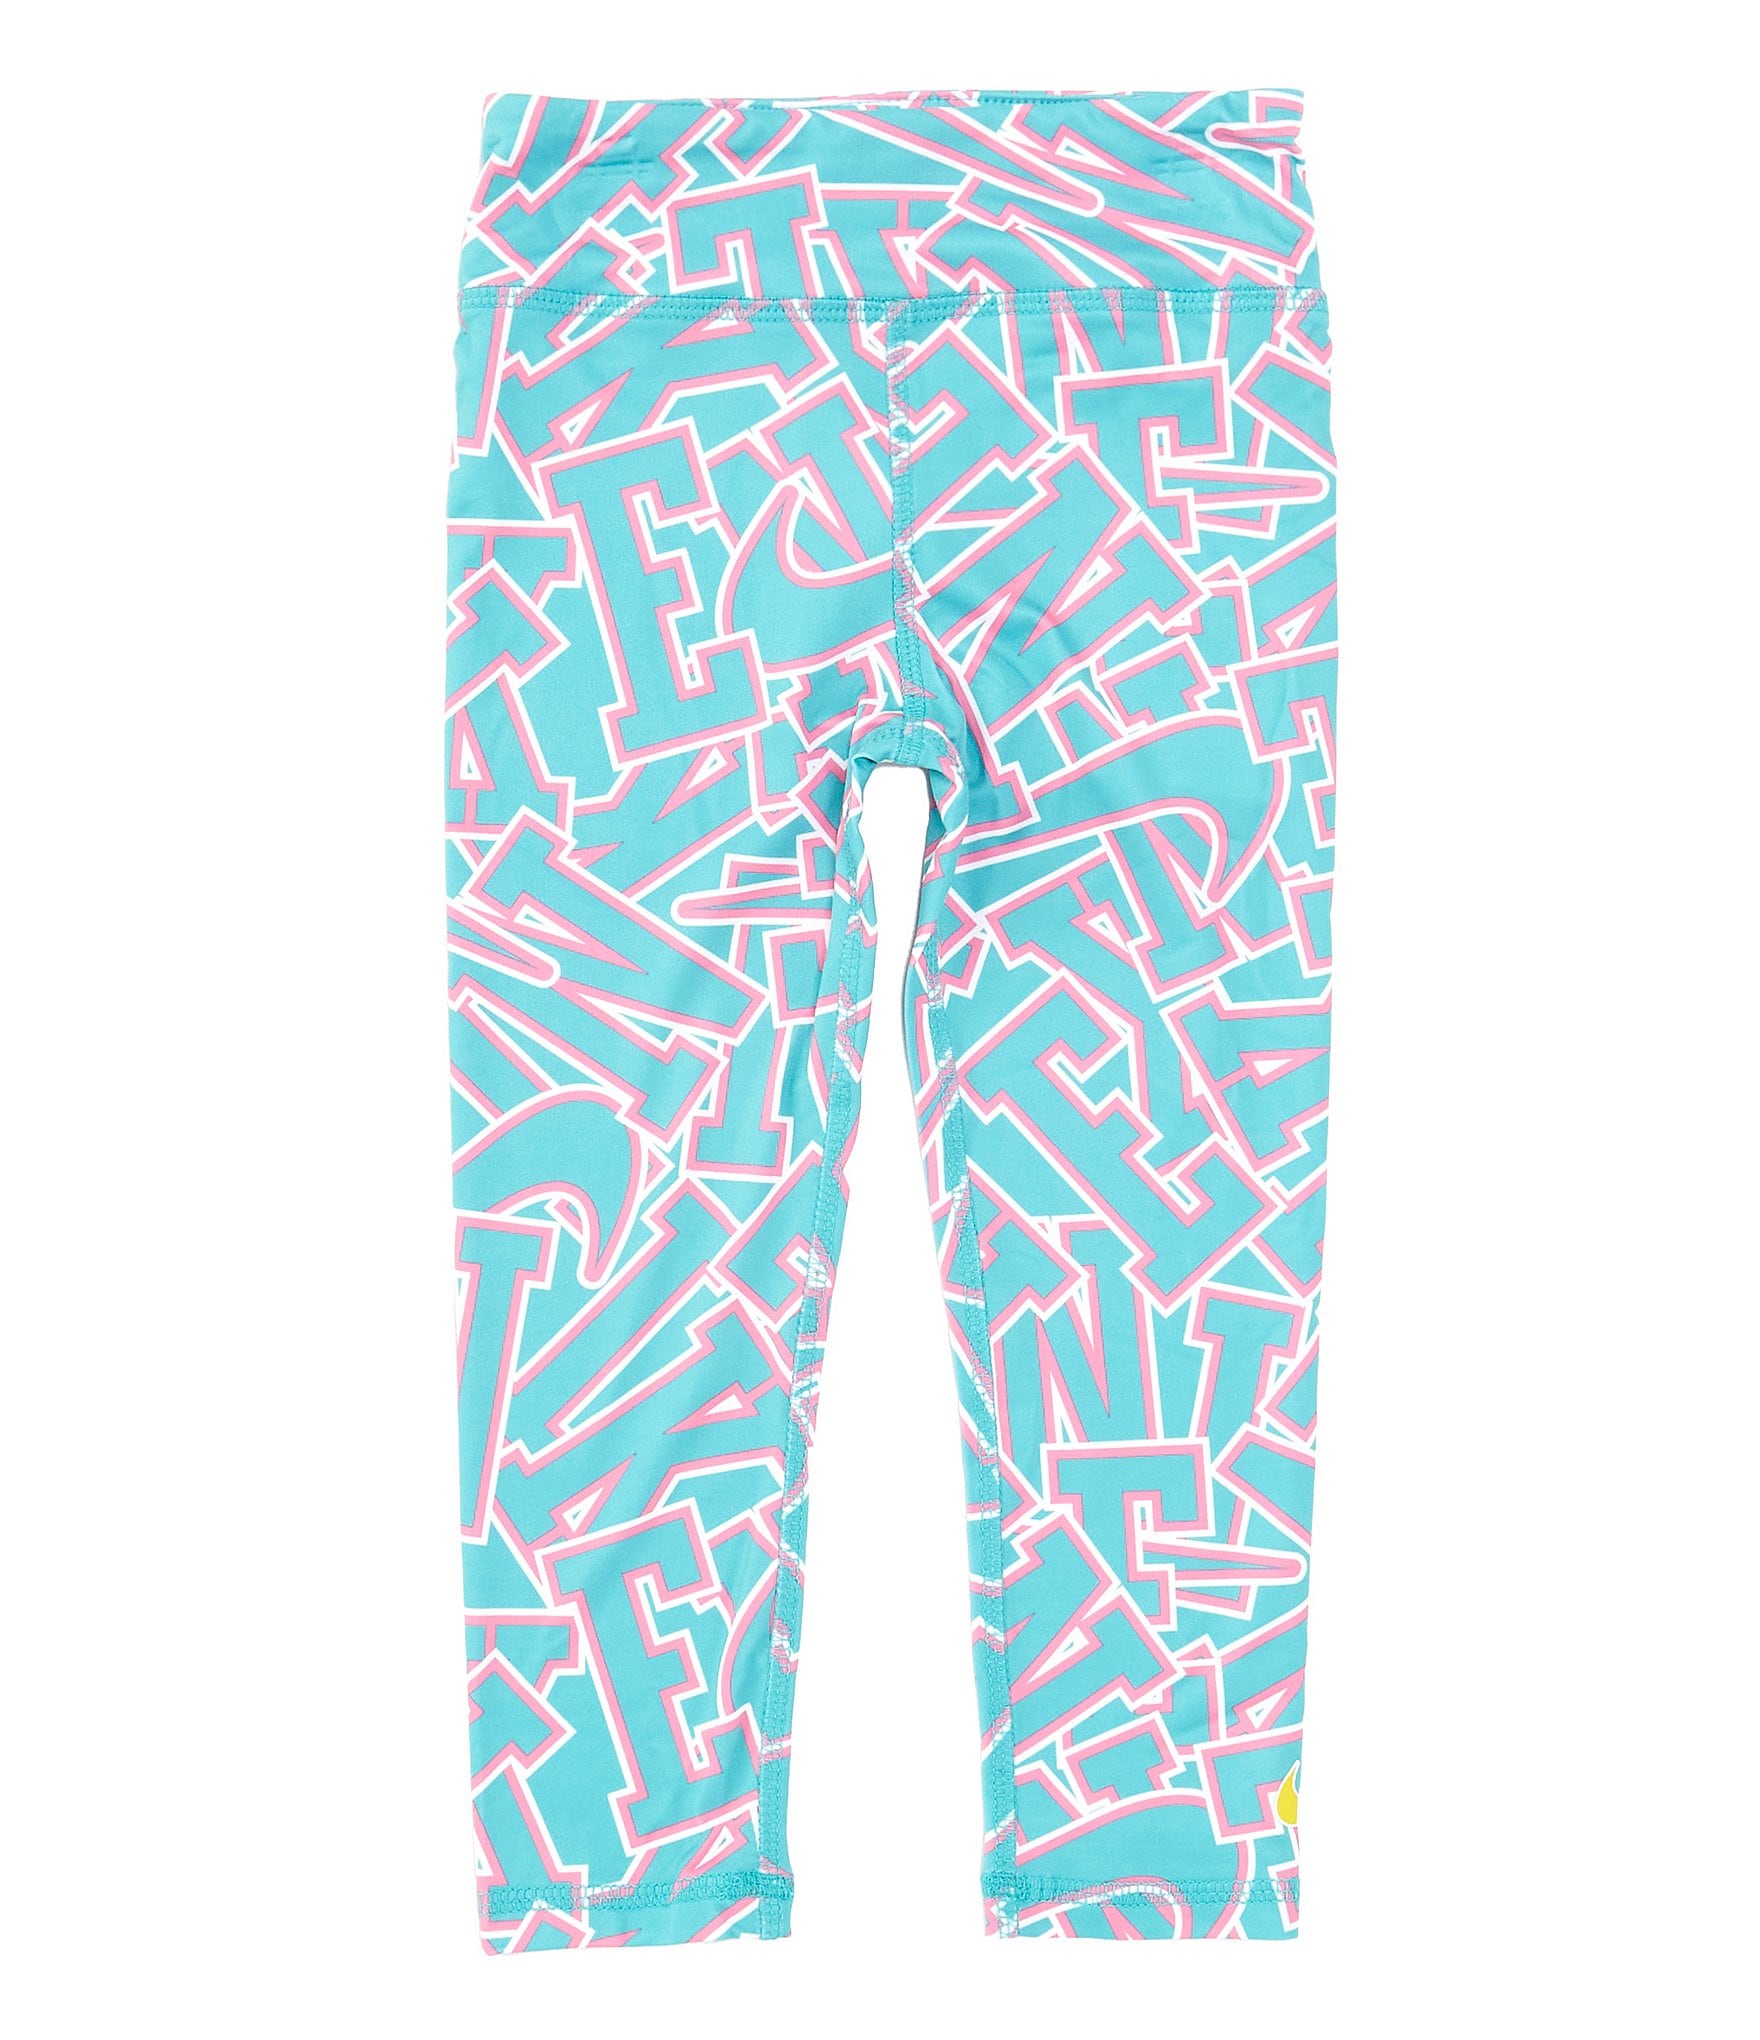 https://dimg.dillards.com/is/image/DillardsZoom/zoom/nike-little-girls-2t-6x-join-the-club-allover-sublimation-printed-leggings/00000000_zi_4a574971-2bde-4eee-b38a-db0174baeab7.jpg